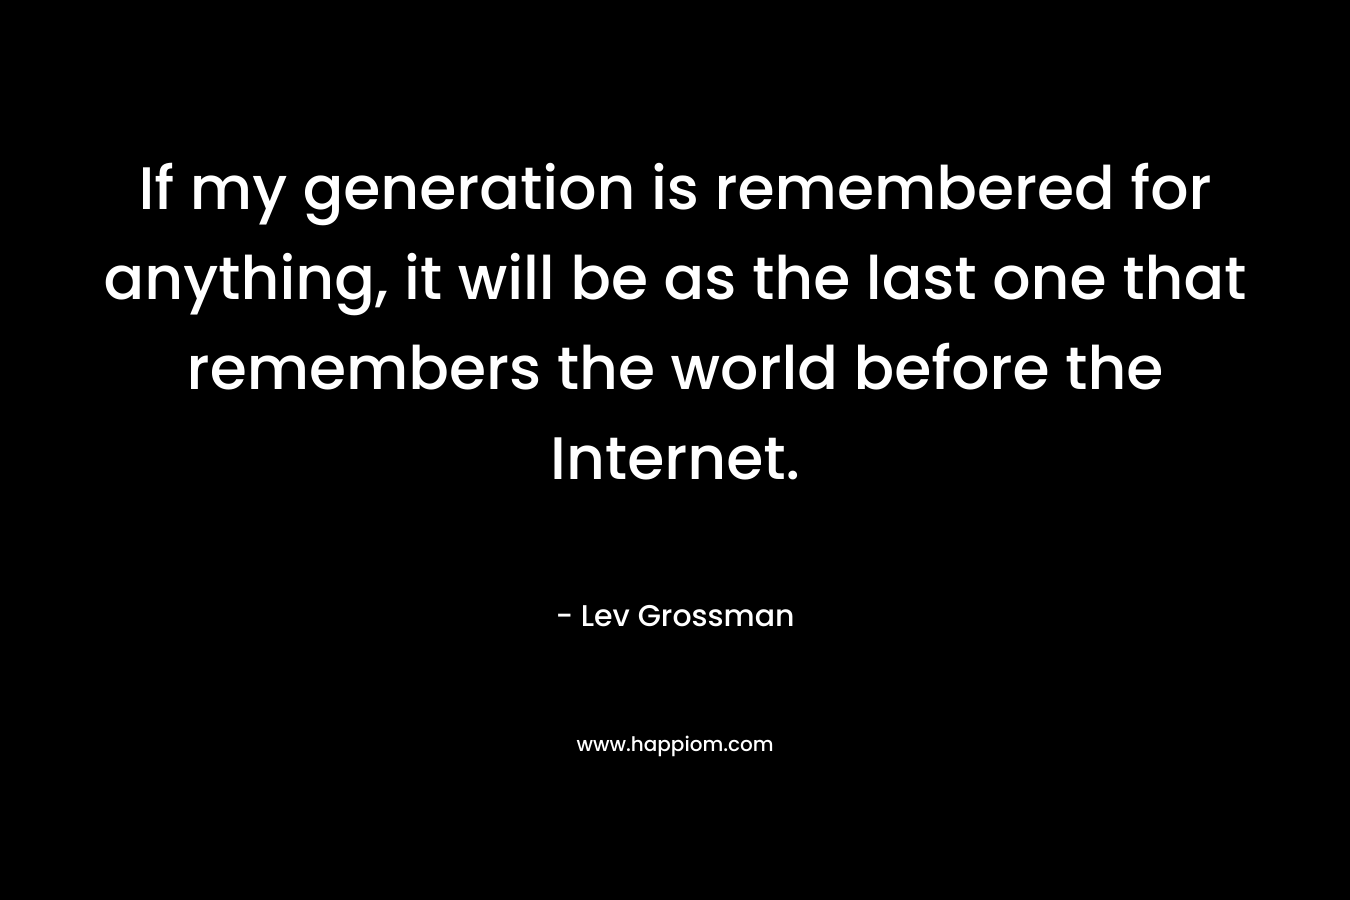 If my generation is remembered for anything, it will be as the last one that remembers the world before the Internet.